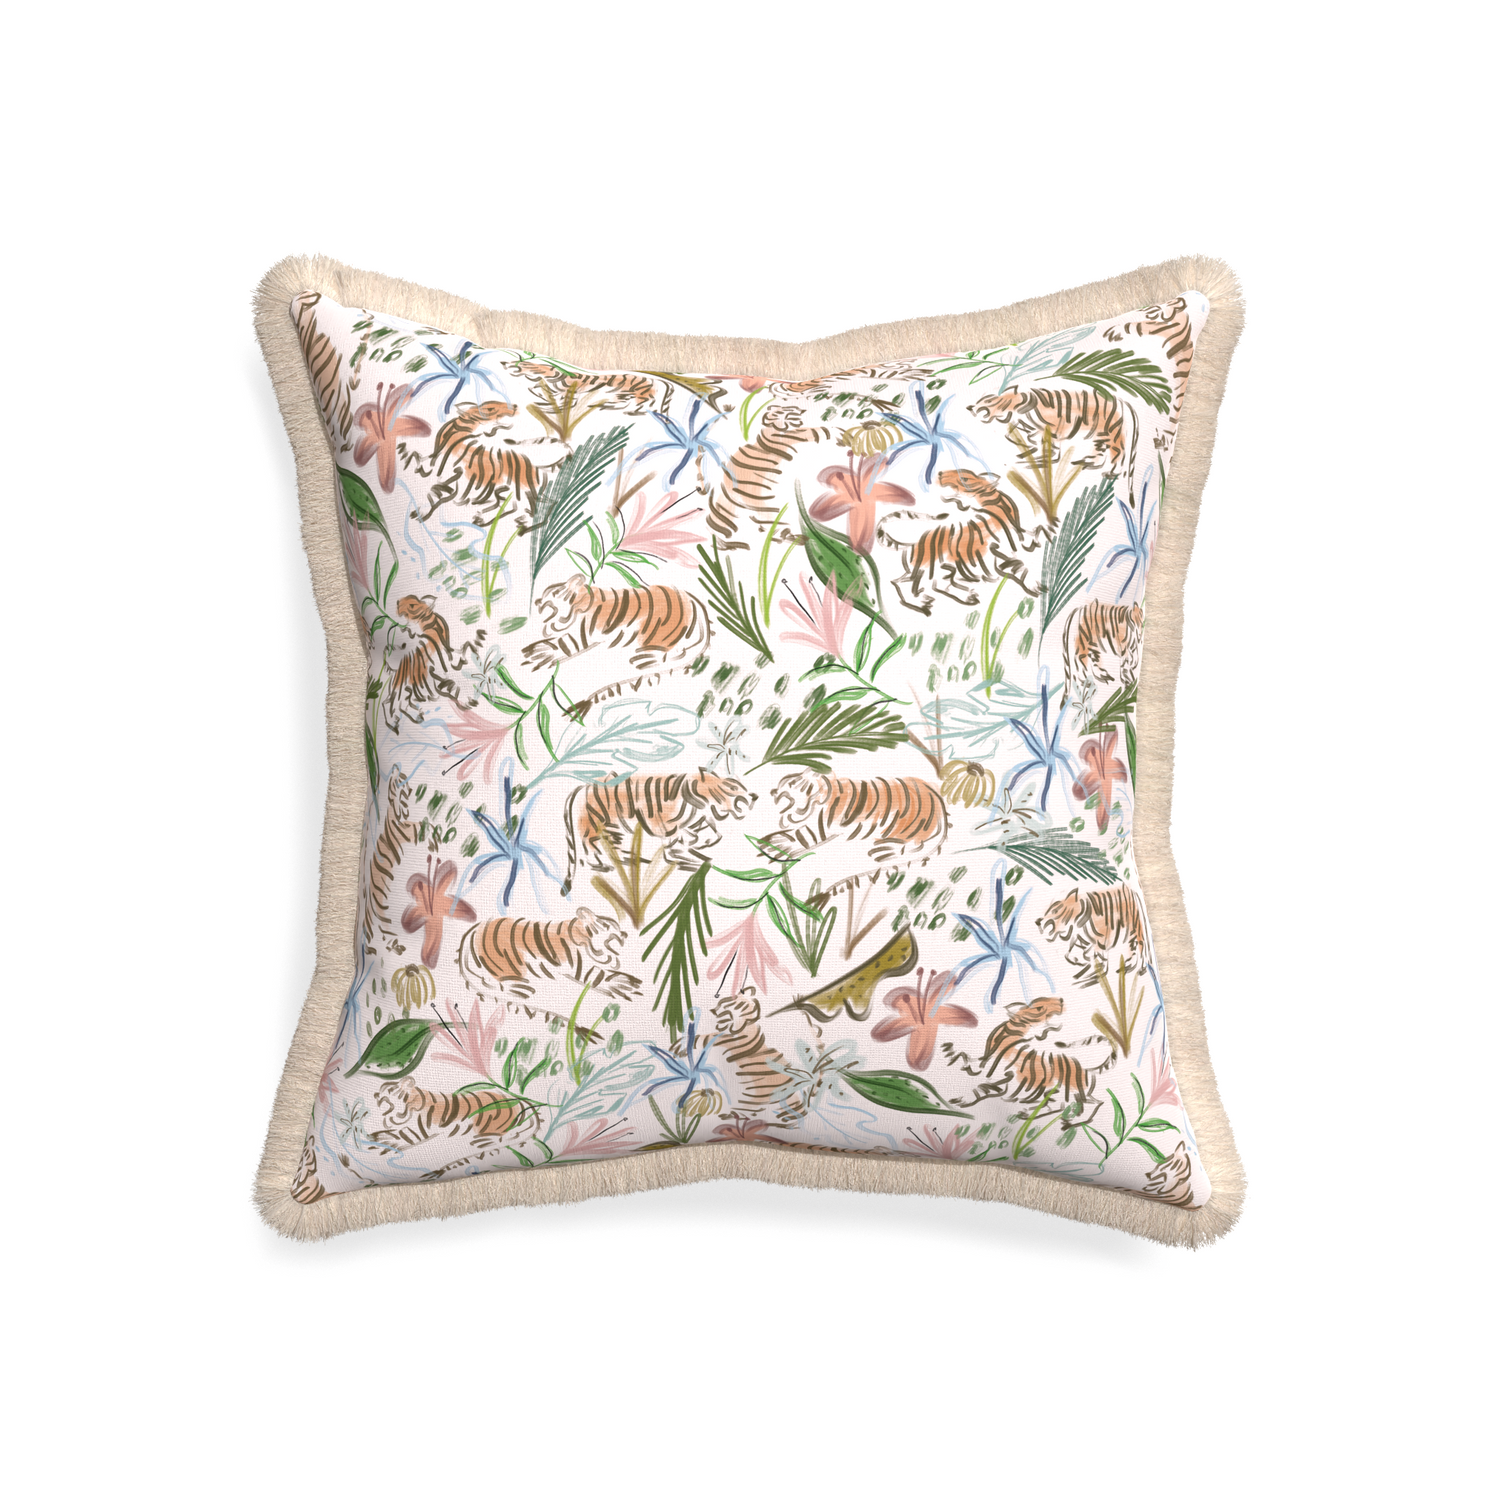 20-square frida pink custom pink chinoiserie tigerpillow with cream fringe on white background